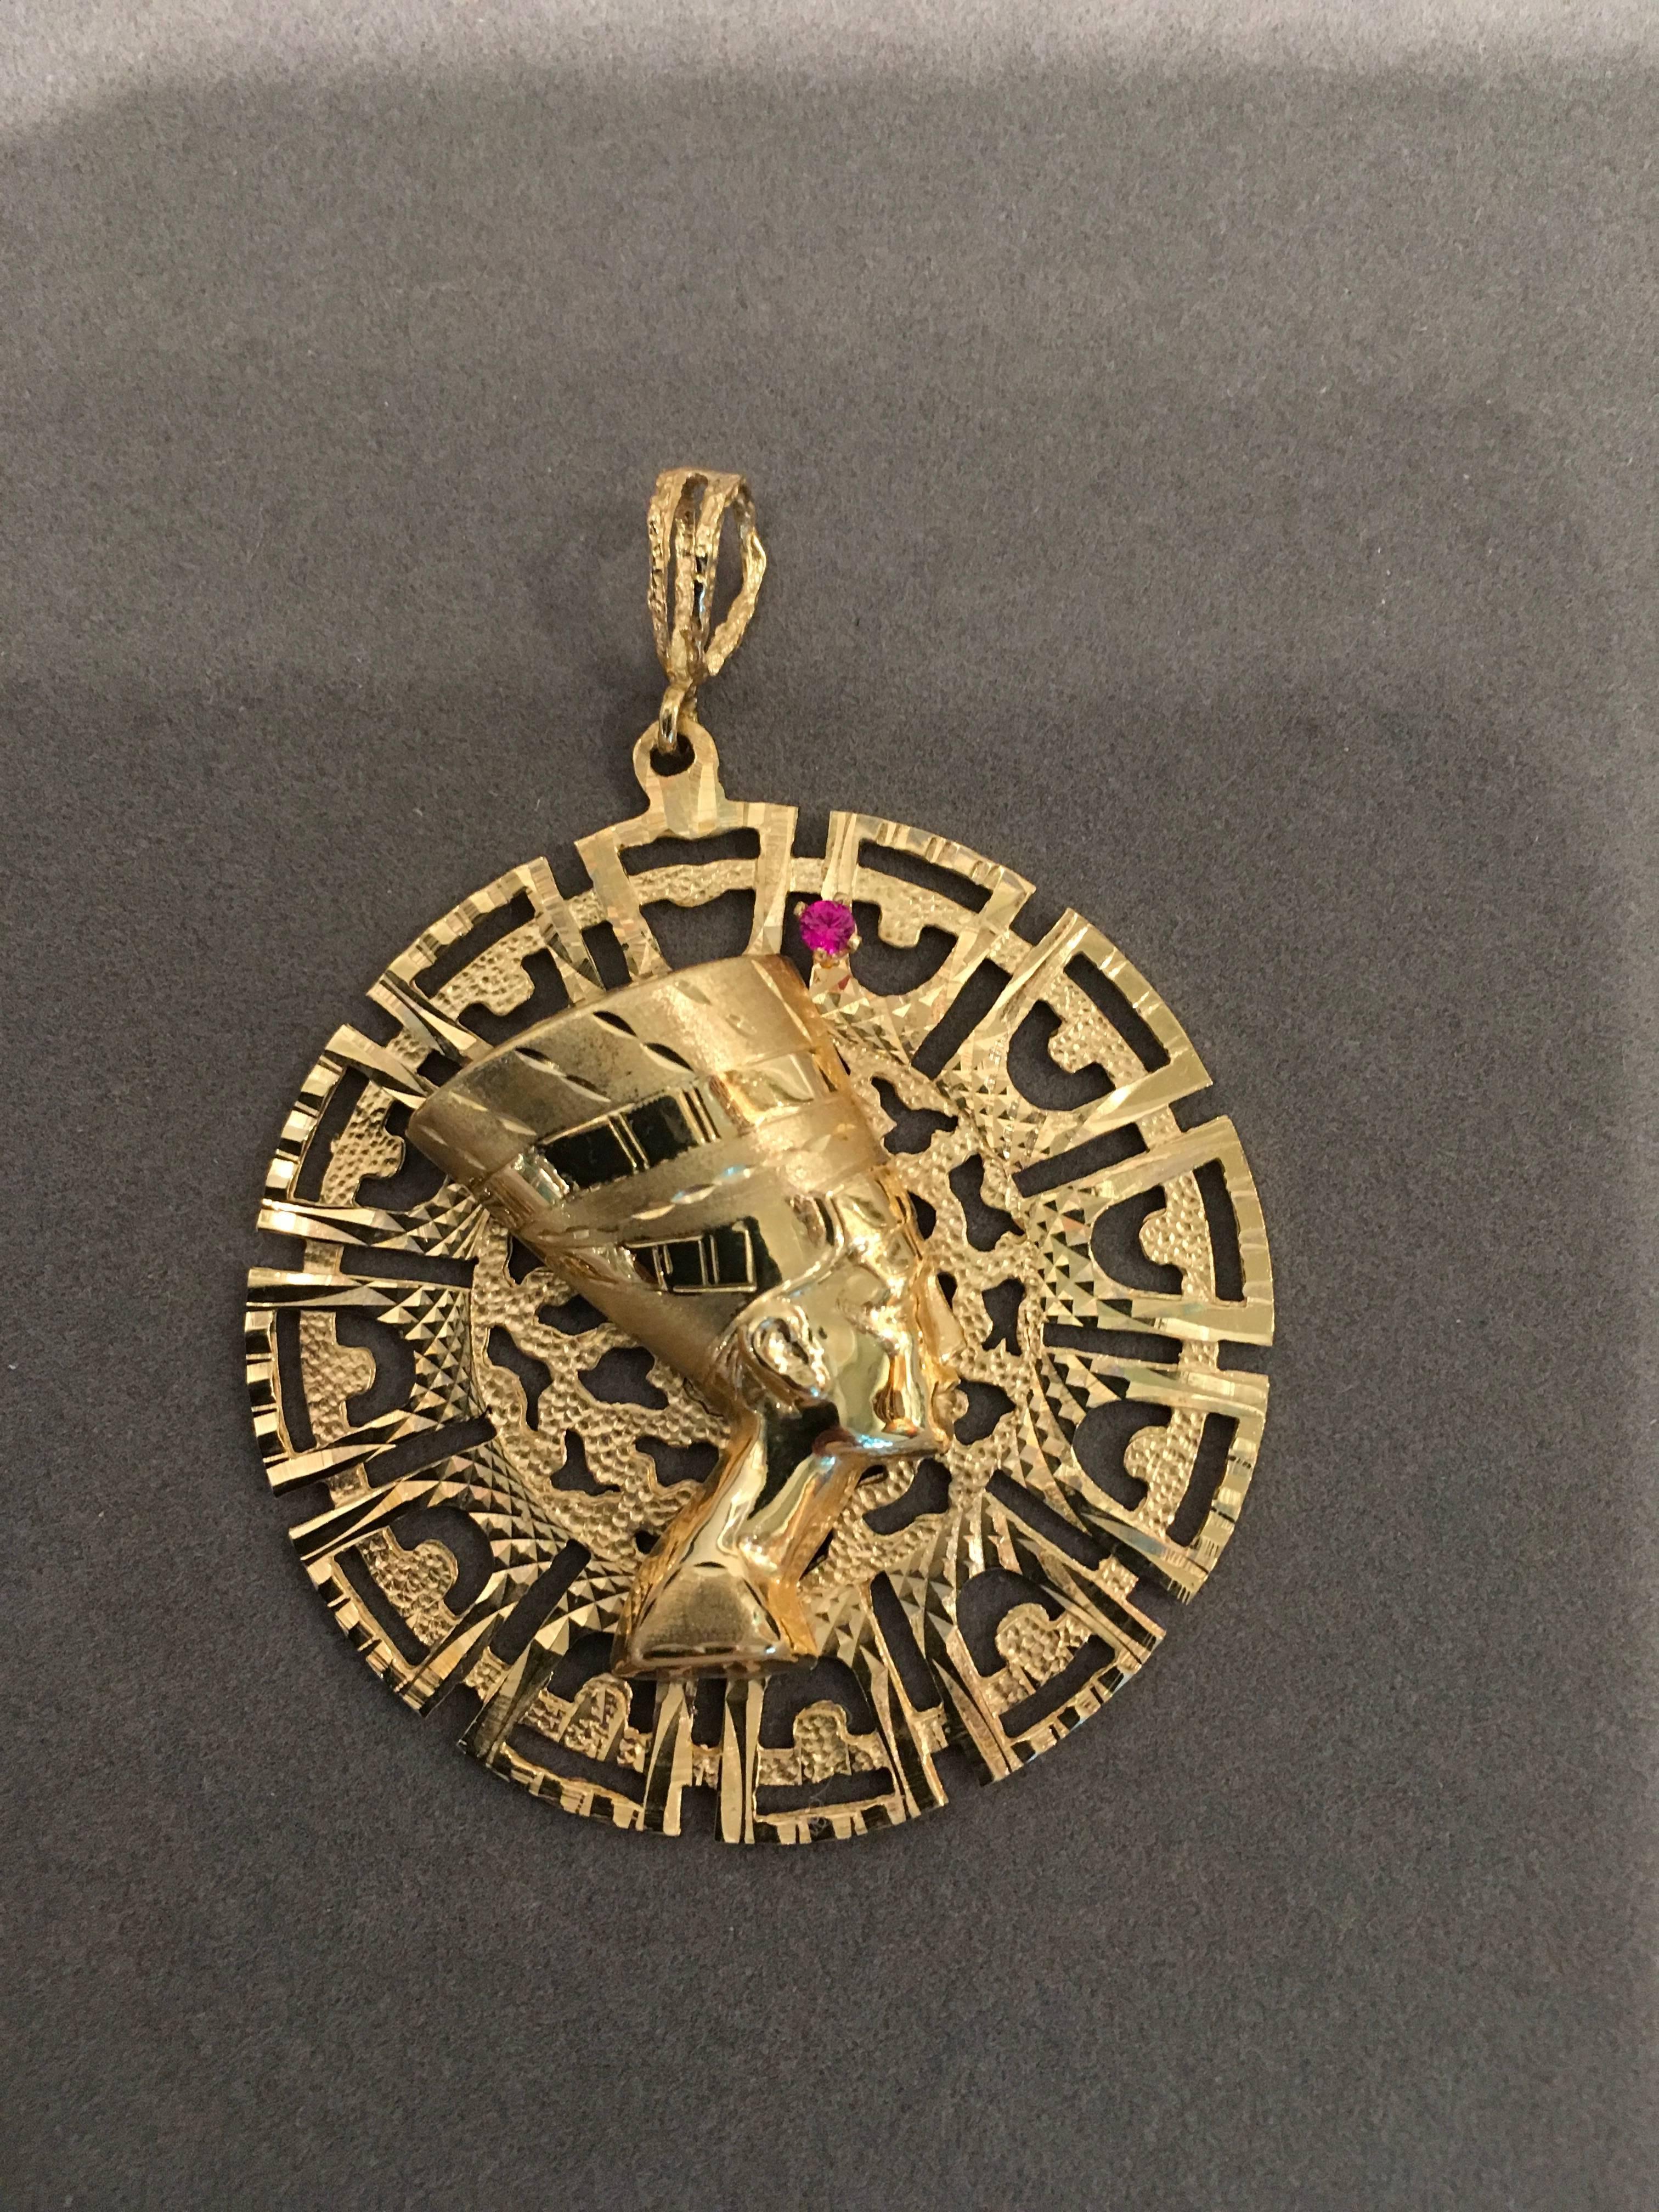 A vintage pendant featuring a bust of Egyptian Queen Nefertiti over a geometric background in 14K gold, circa 1975. The pierced disk has a variety of textures and cut-outs. Hollow profile of Nefertiti is mounted at the center with a bright pink